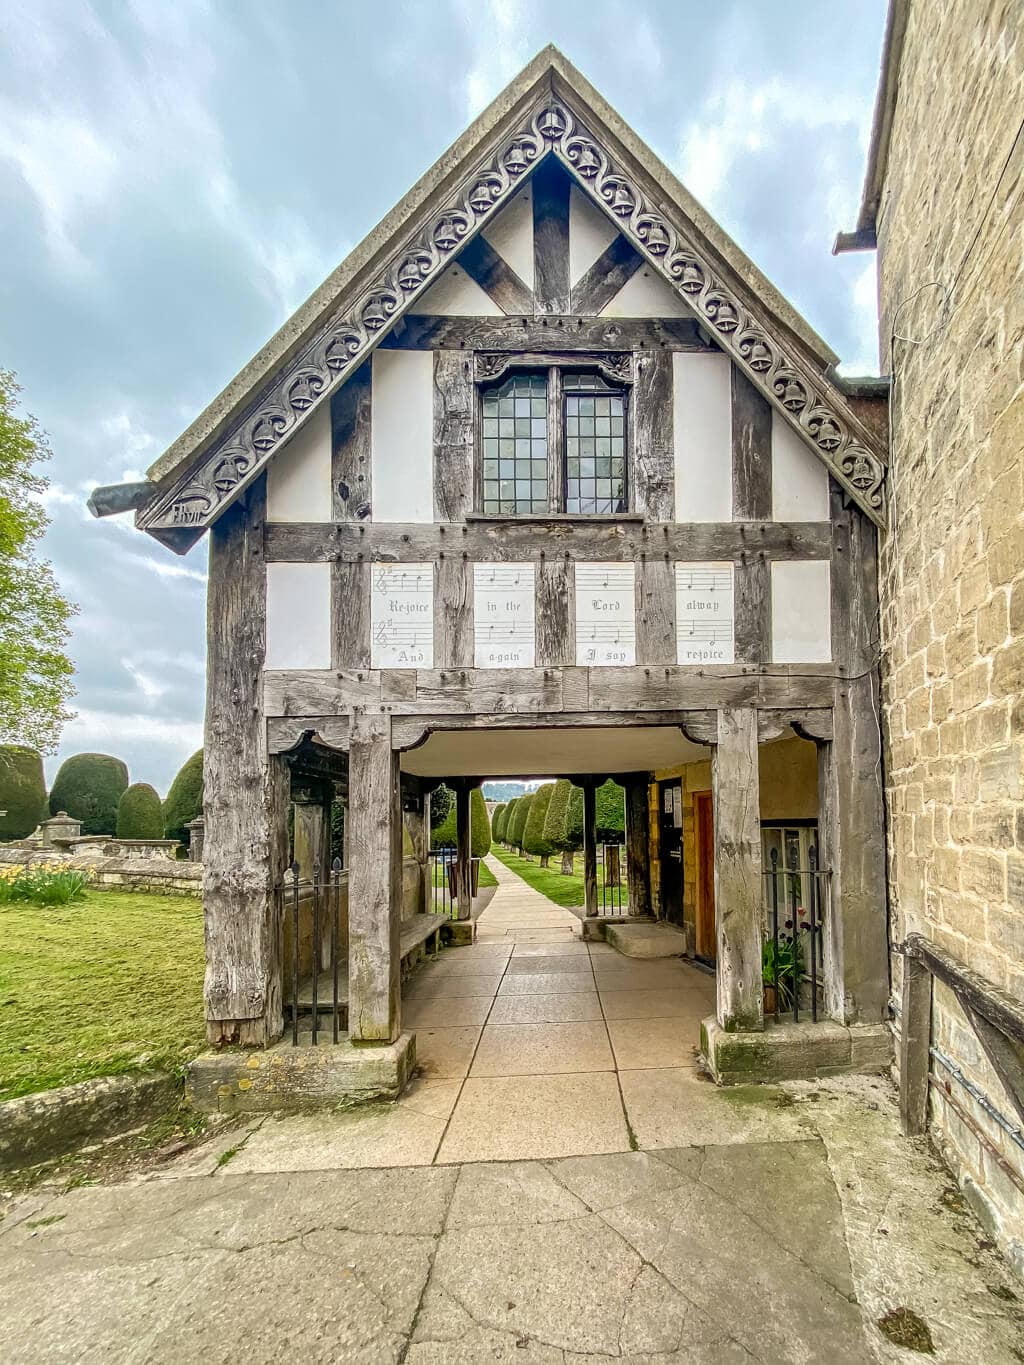 gatehouse in painswick that is half-timbered like many buildings constructed during tudor times